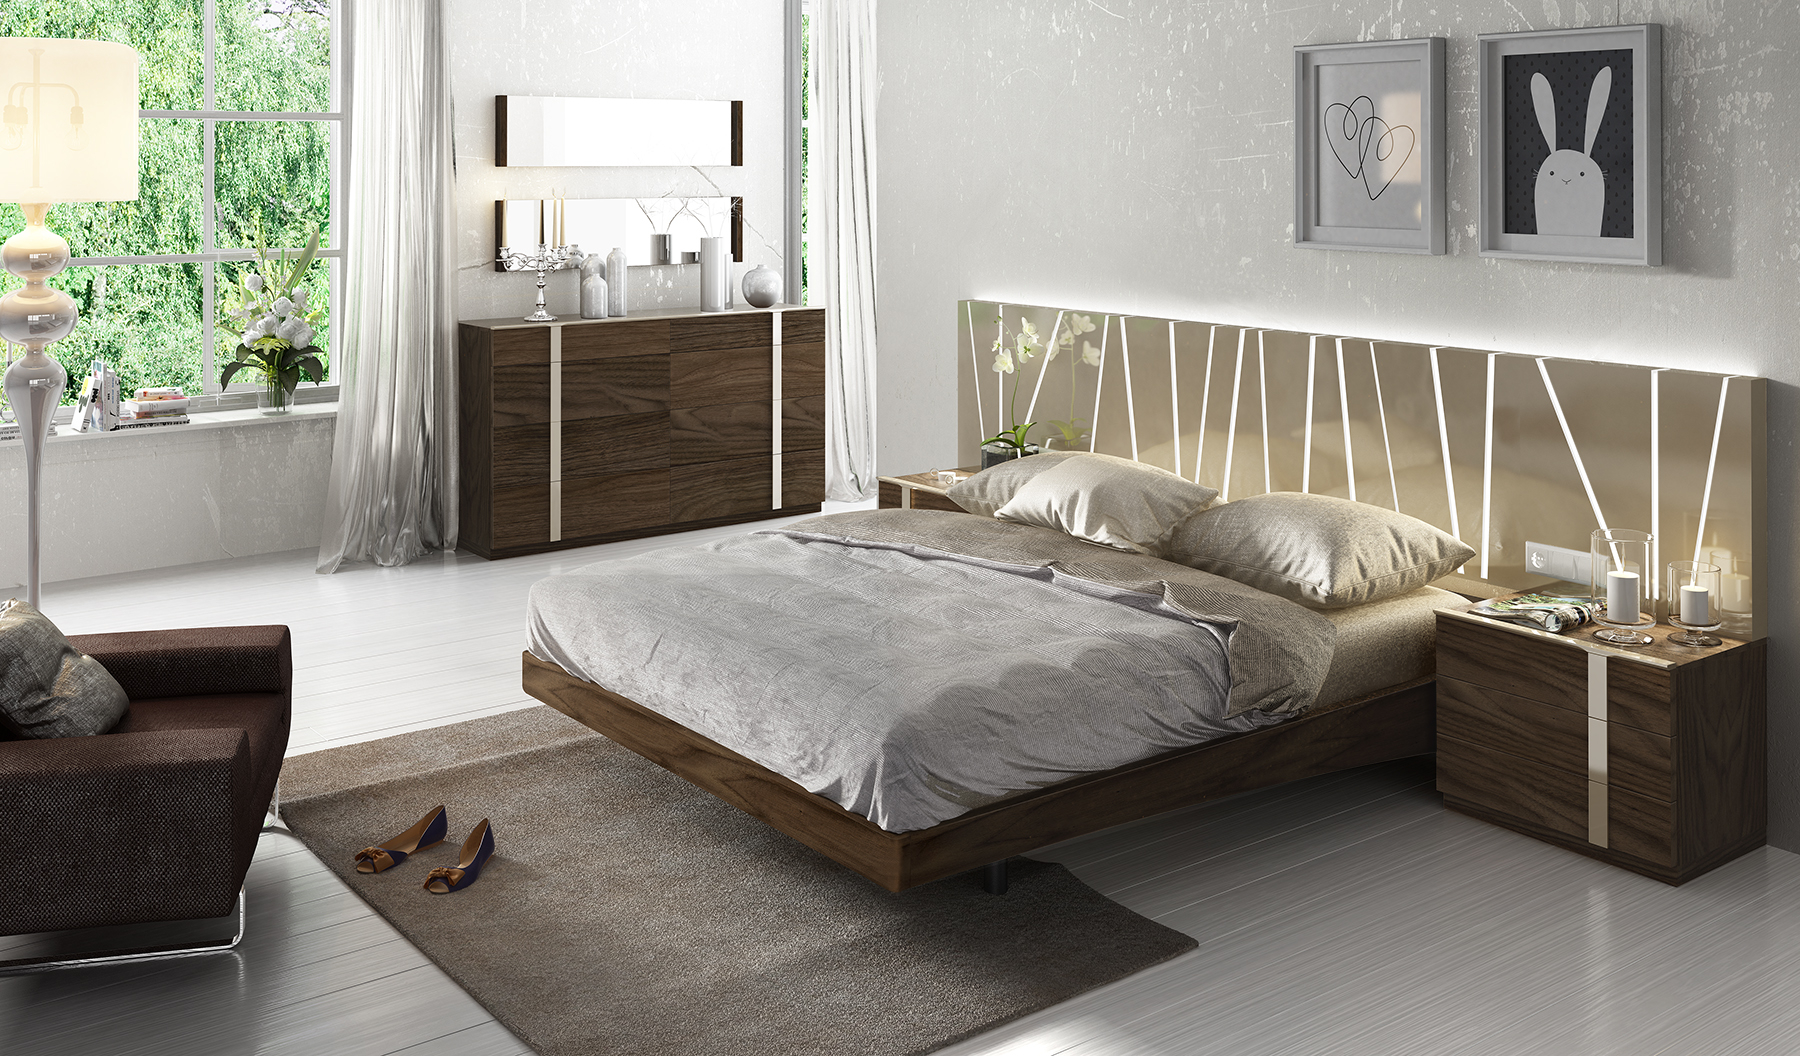 Exclusive Wood Luxury Bedroom Set Feat Light pertaining to sizing 1800 X 1056